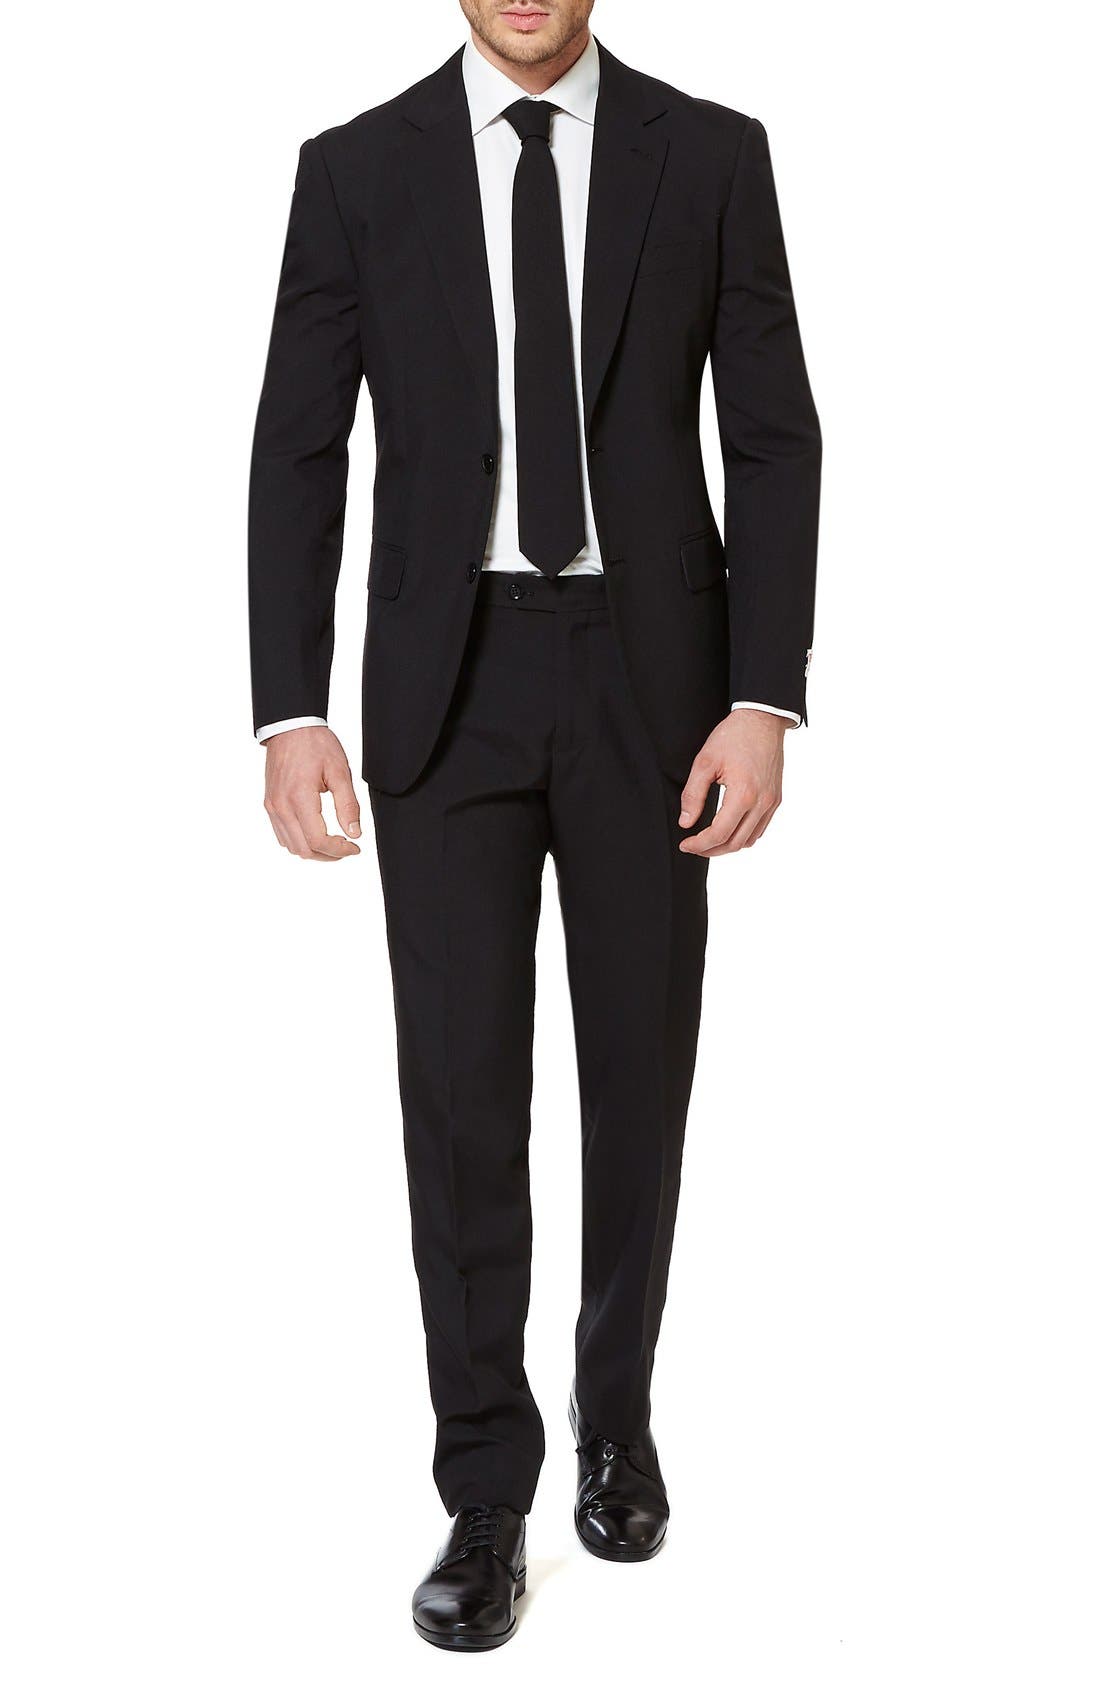 Men suits black – a variety of styles for you to choose from缩略图